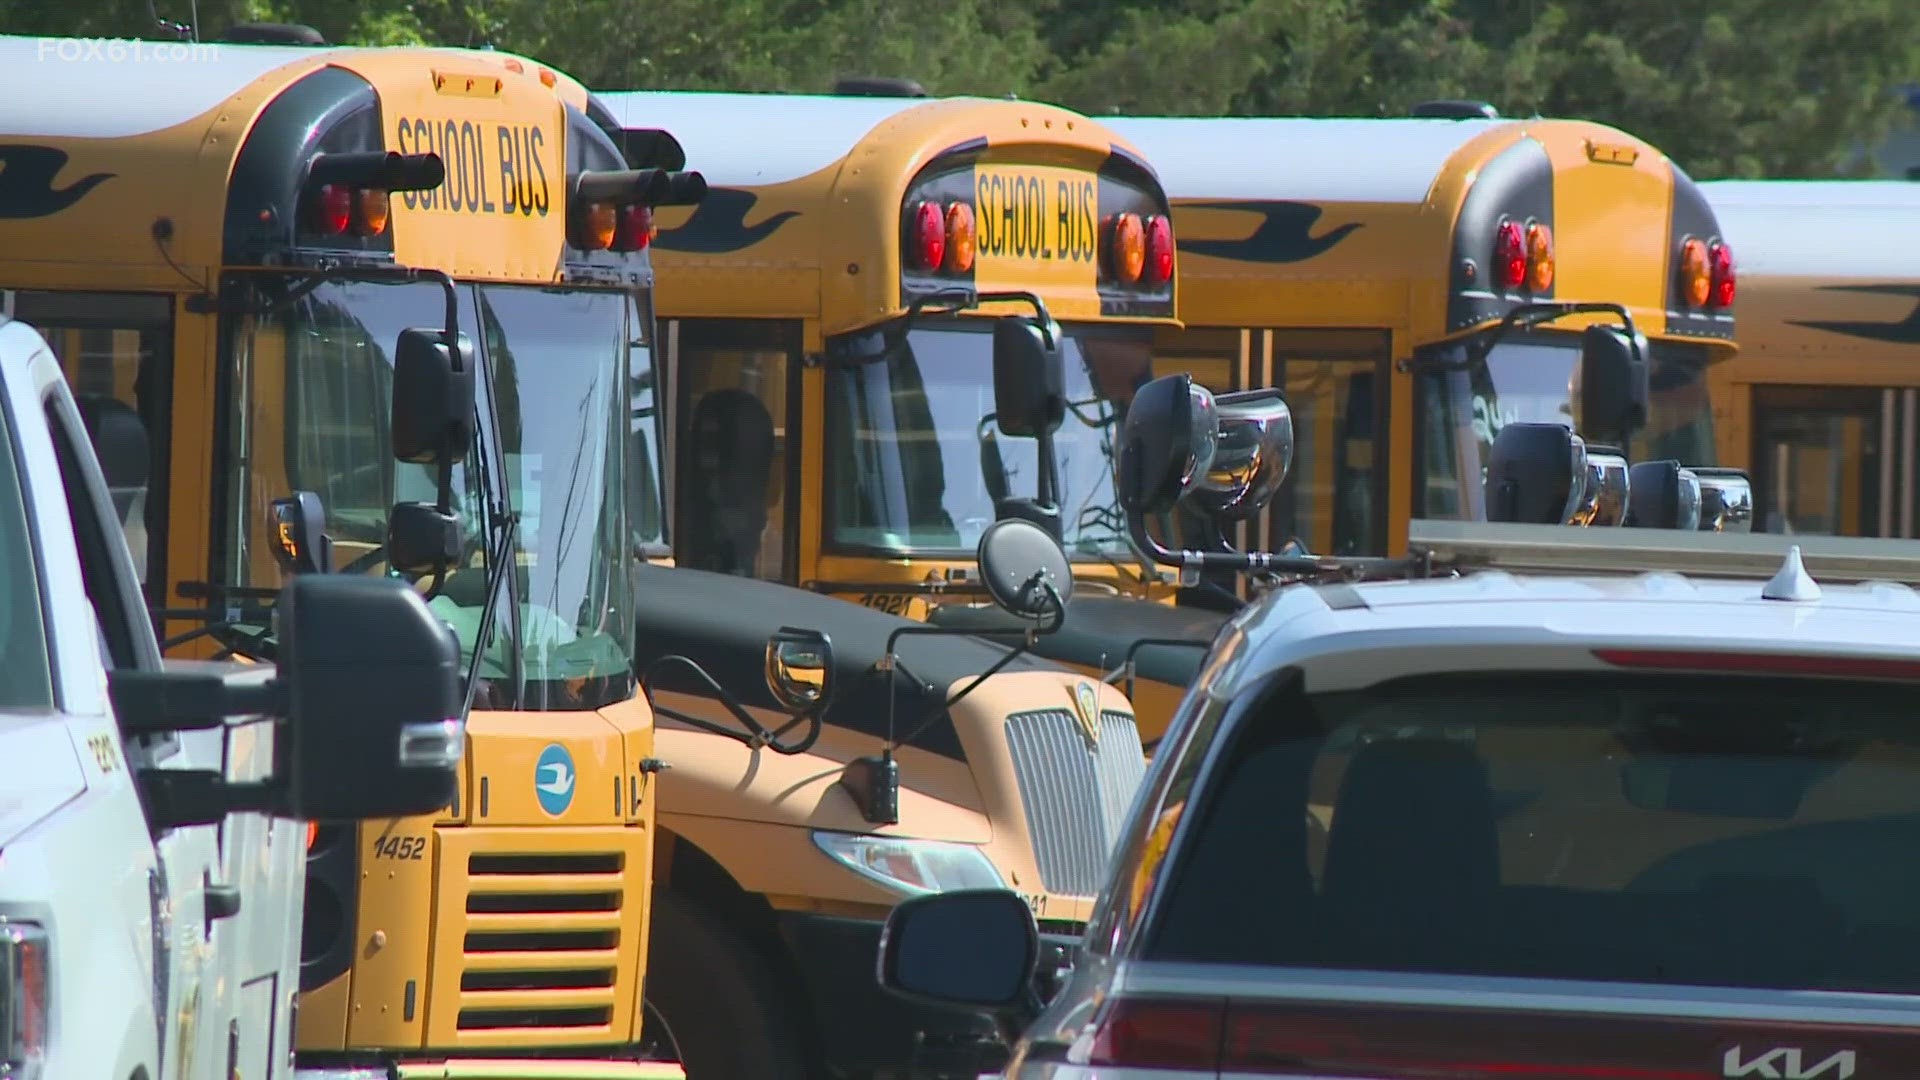 Some bus companies in Connecticut are feeling the impacts of a driver shortage as the school year drives closer.